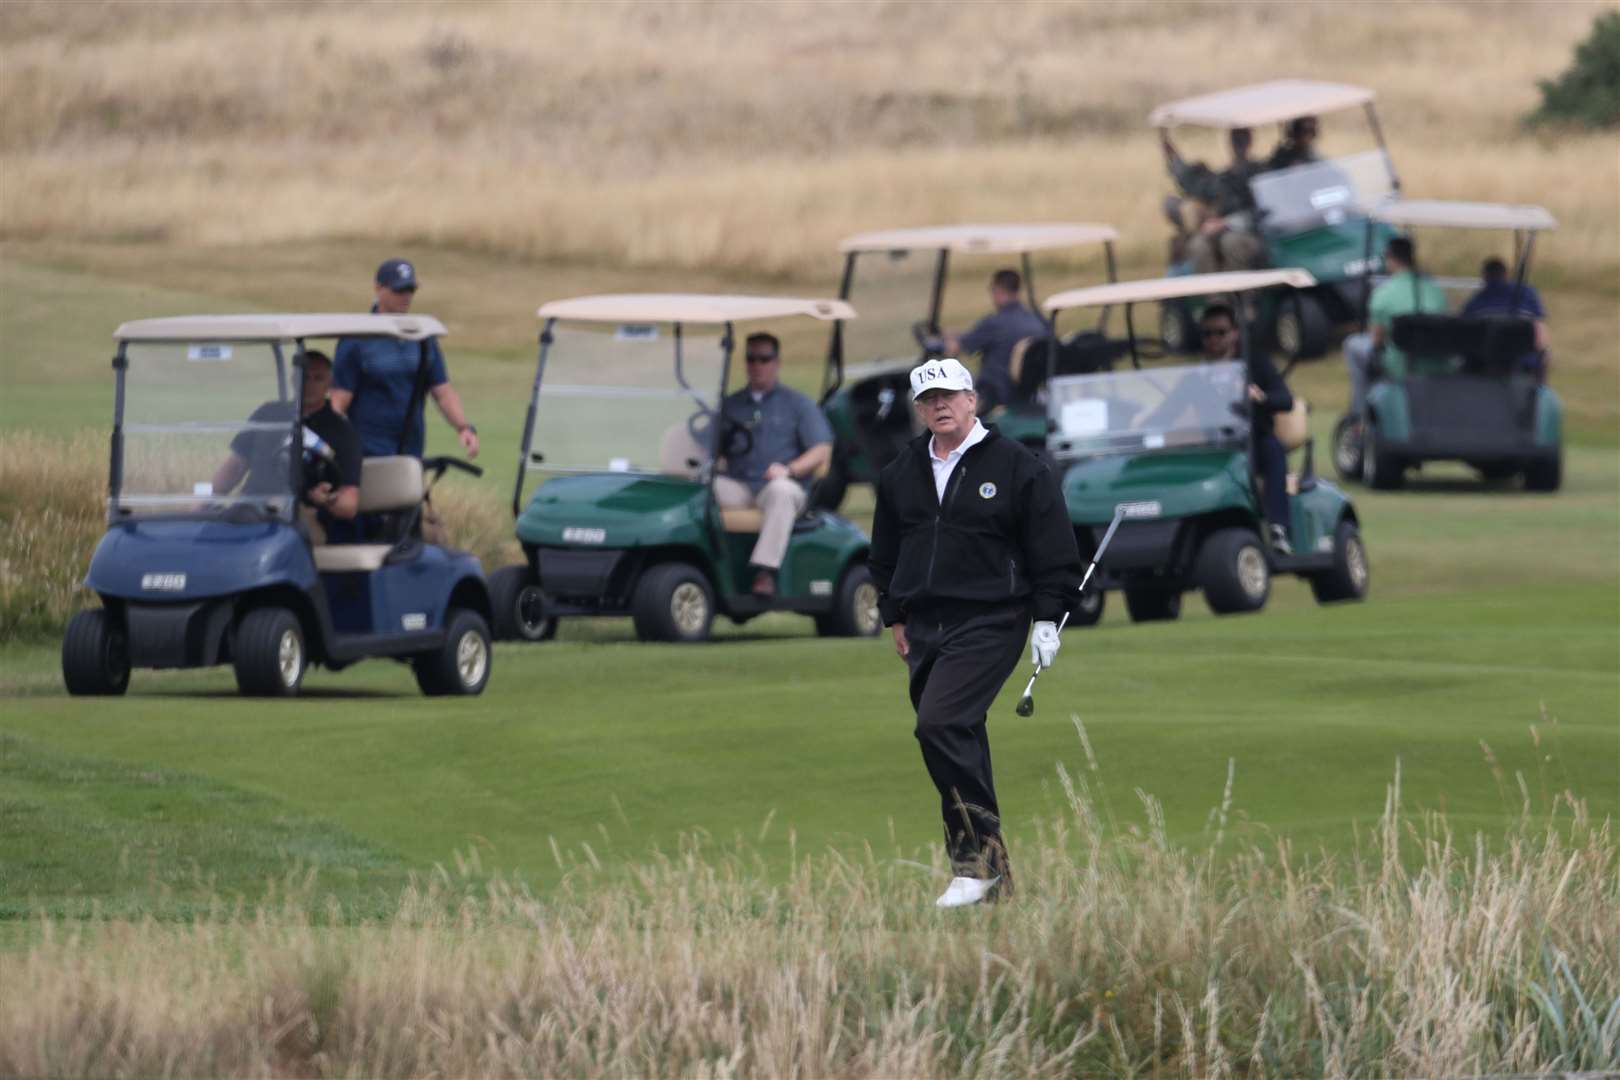 Donald Trump plays a round of golf on the Trump Turnberry resort in South Ayrshire (Jane Barlow/PA)